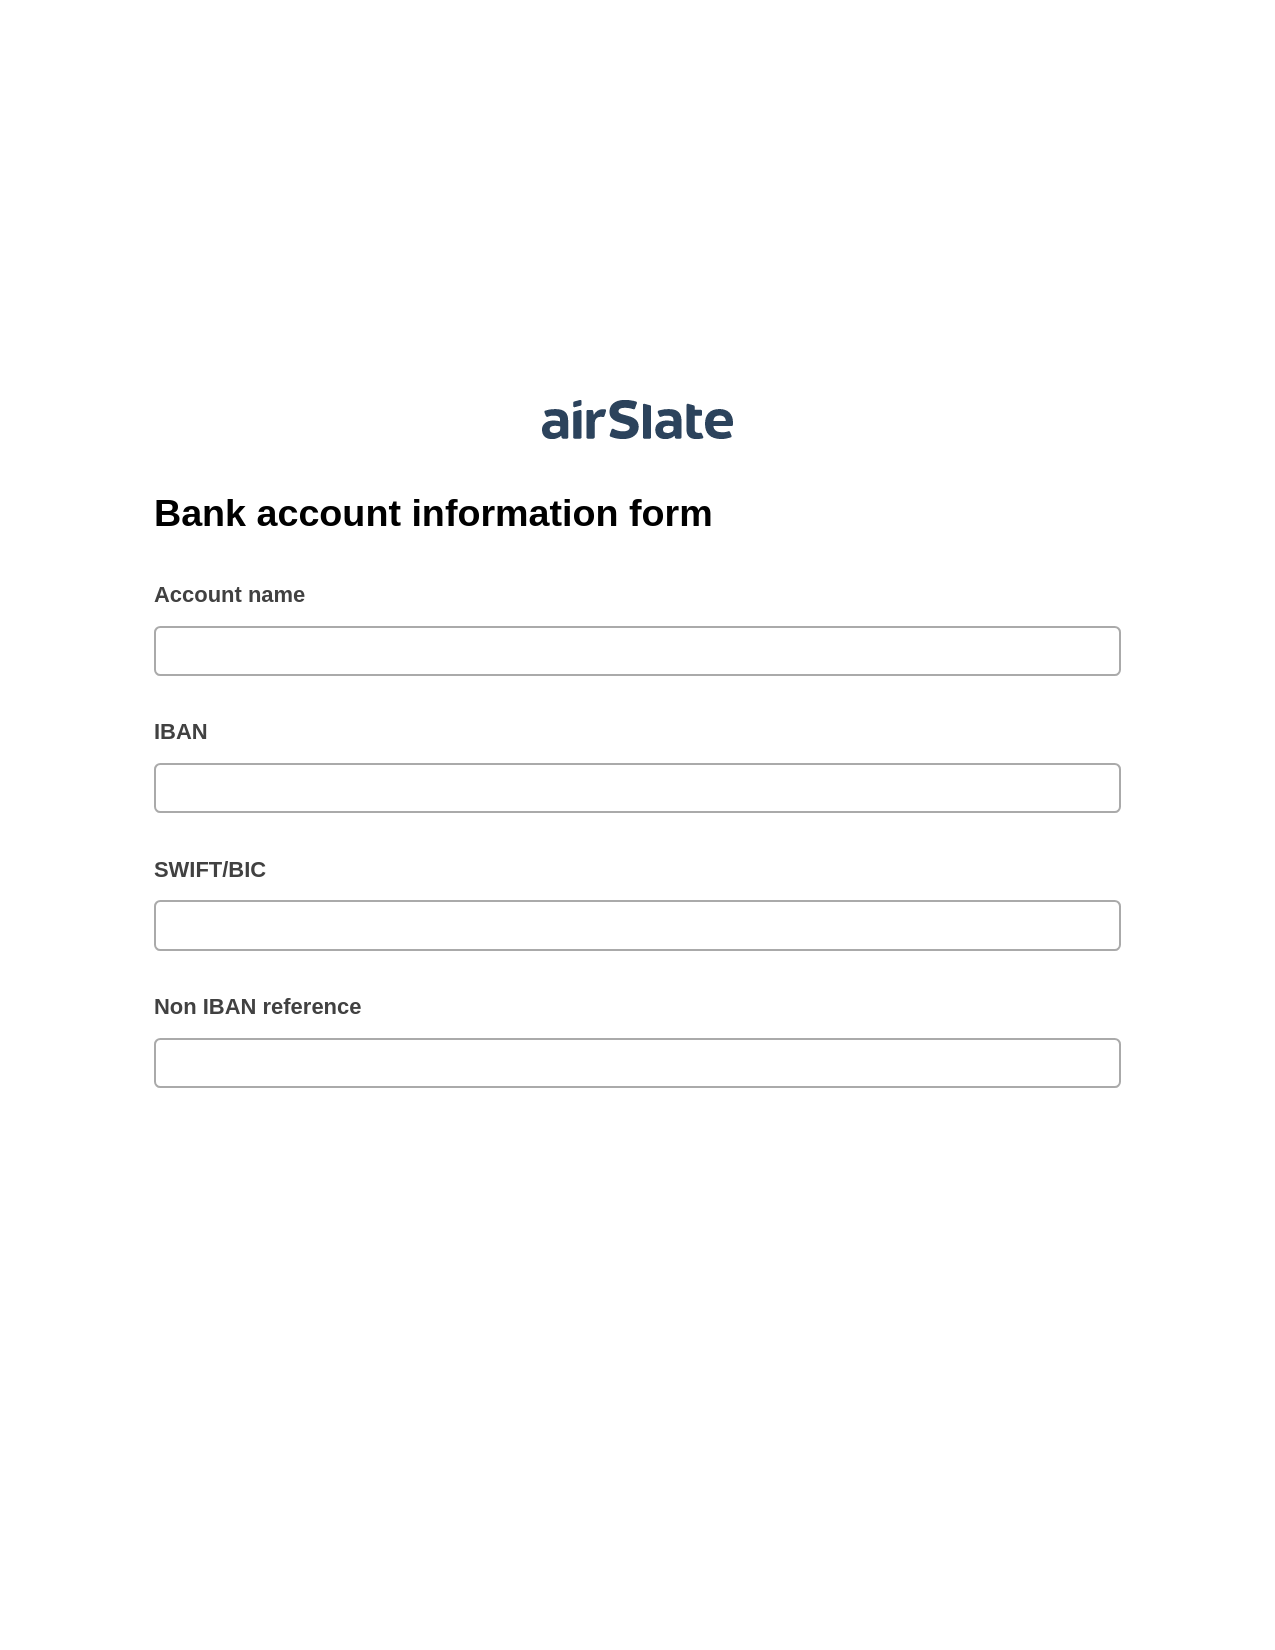 Bank account information form Pre-fill Dropdown from Airtable, Mailchimp add recipient to audience Bot, Archive to SharePoint Folder Bot